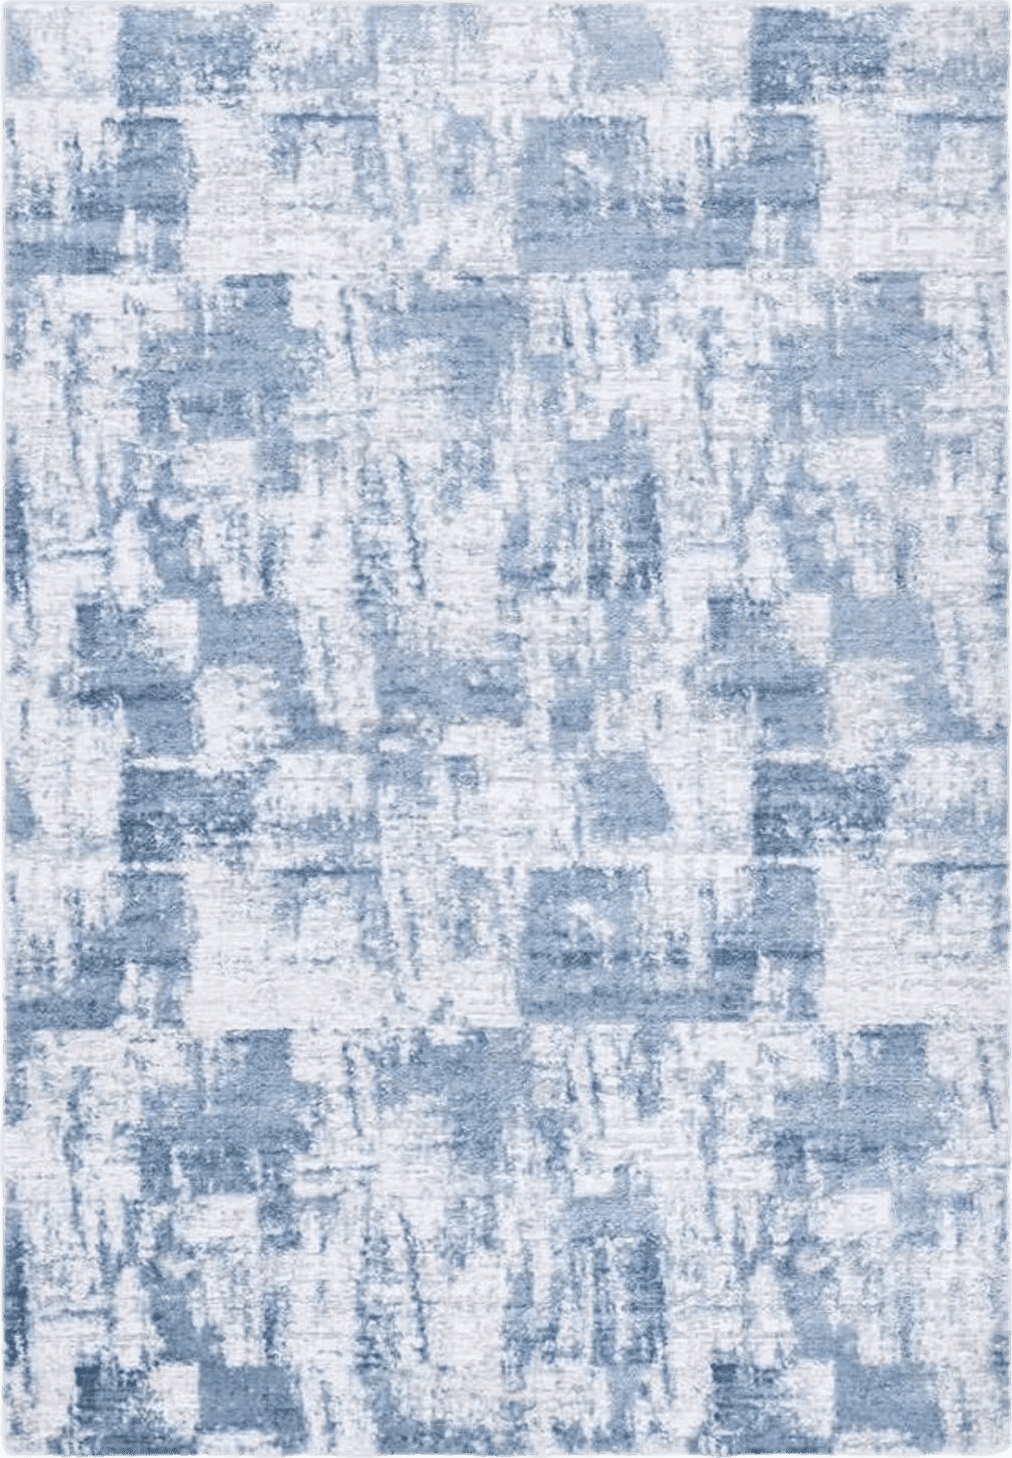 Area Blue SAFAVIEH Amelia Collection Area Rug - 9' x 12', Ivory & Blue, Modern Abstract Distressed Design, Non-Shedding & Easy Care, Ideal for High Traffic Areas in Living Room, Bedroom (ALA786A)